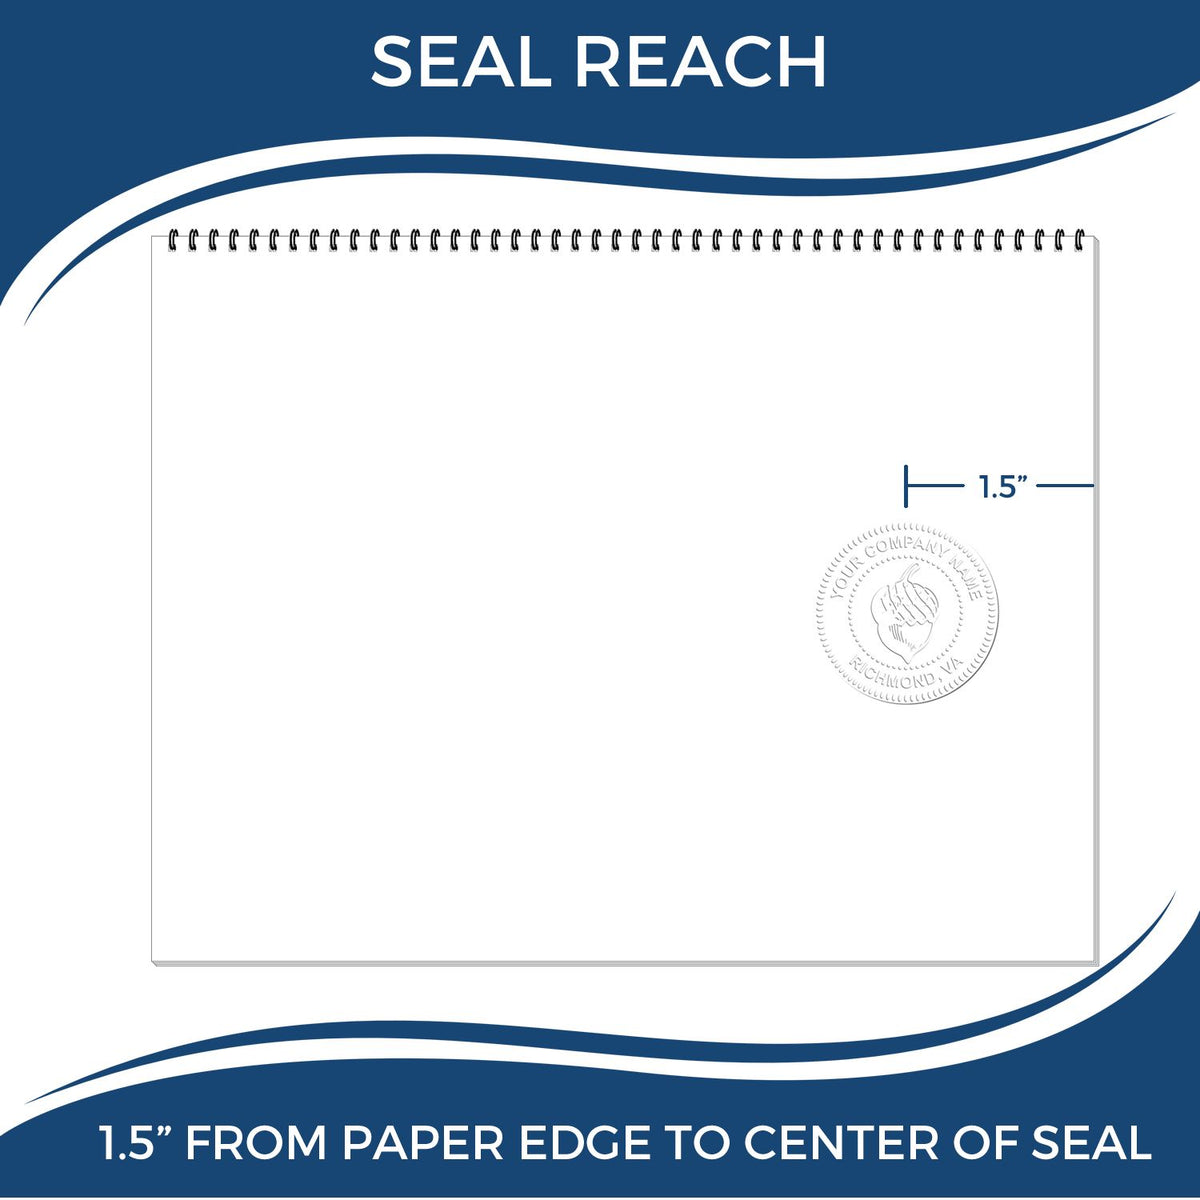 An infographic showing the seal reach which is represented by a ruler and a miniature seal image of the Handheld Hawaii Professional Geologist Embosser